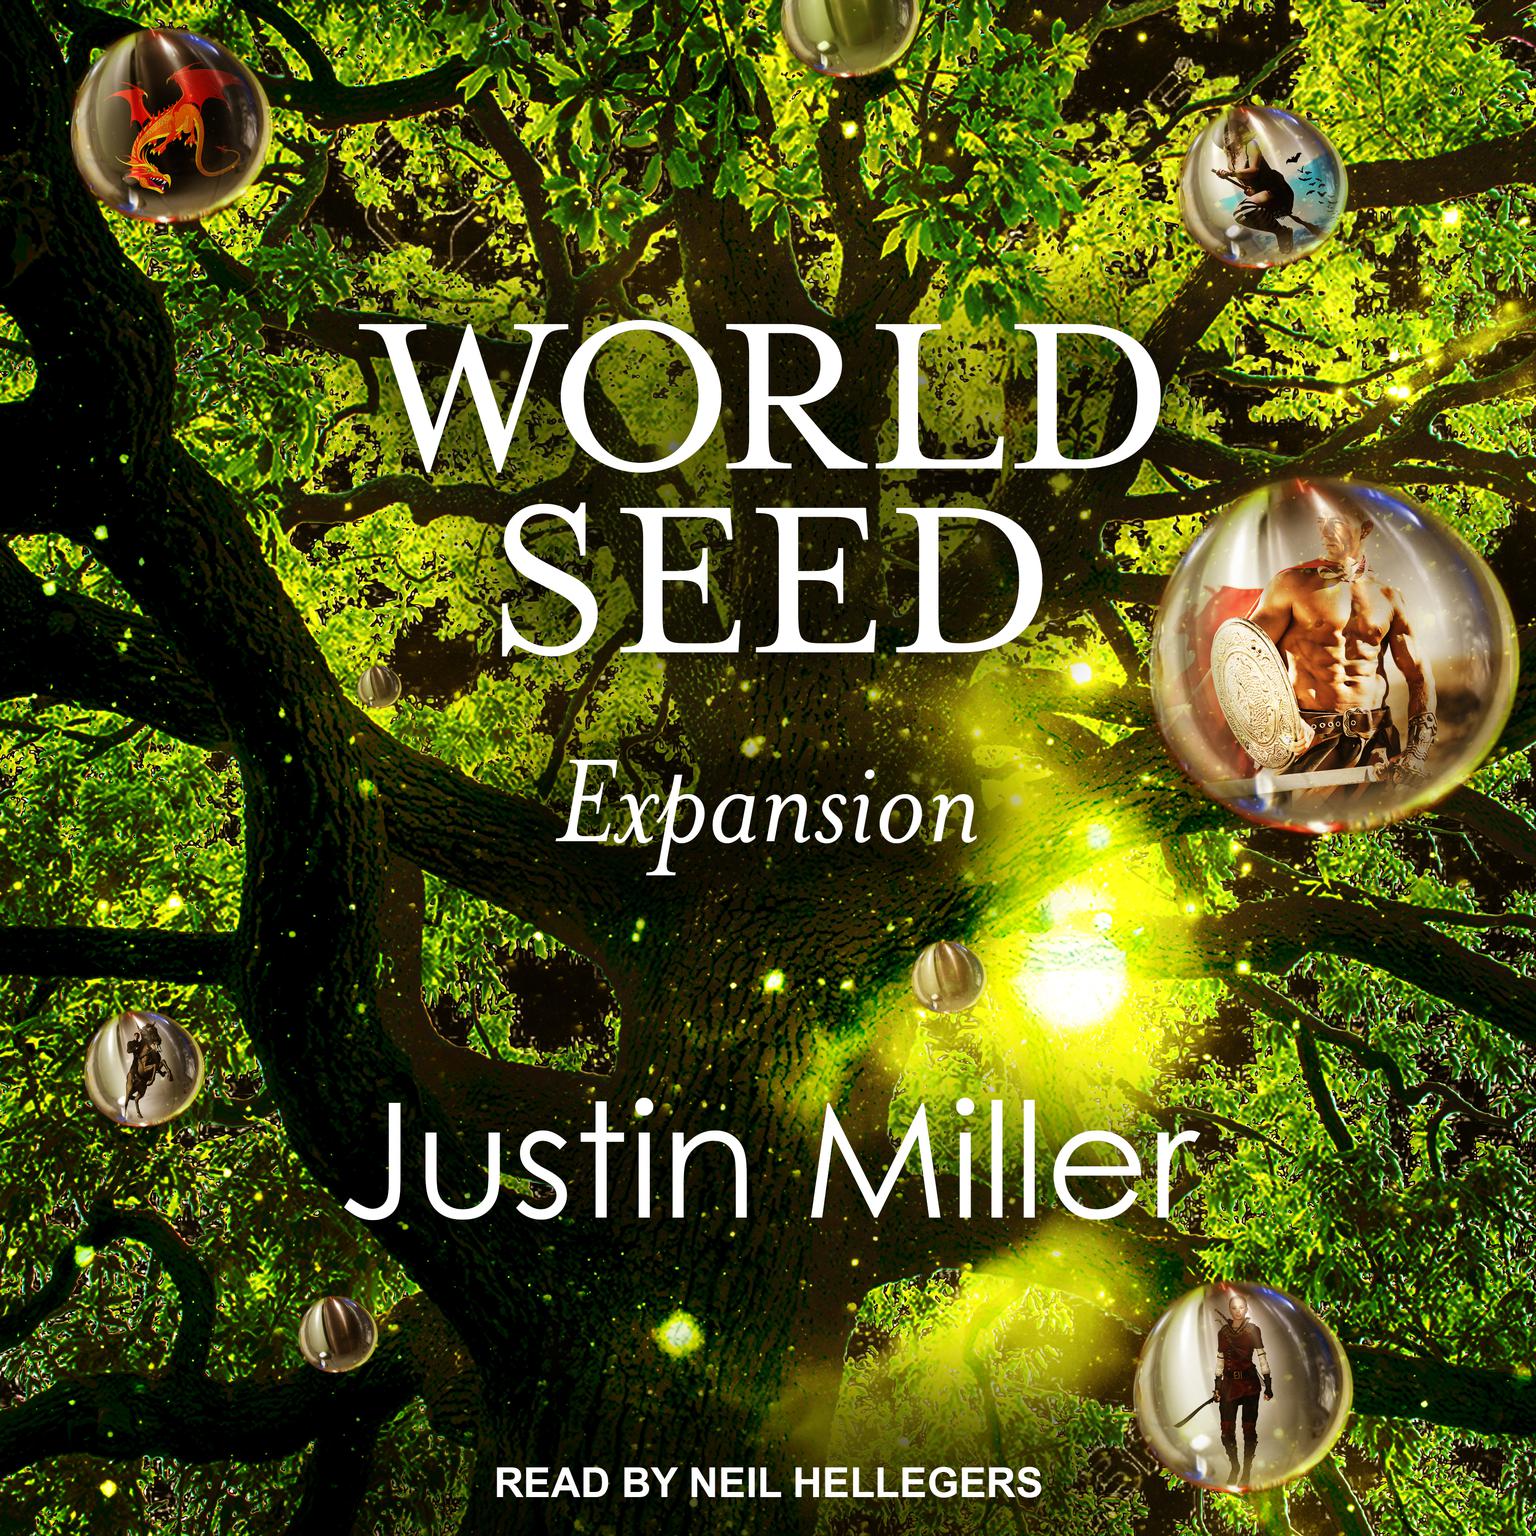 World Seed: Expansion Audiobook, by Justin Miller